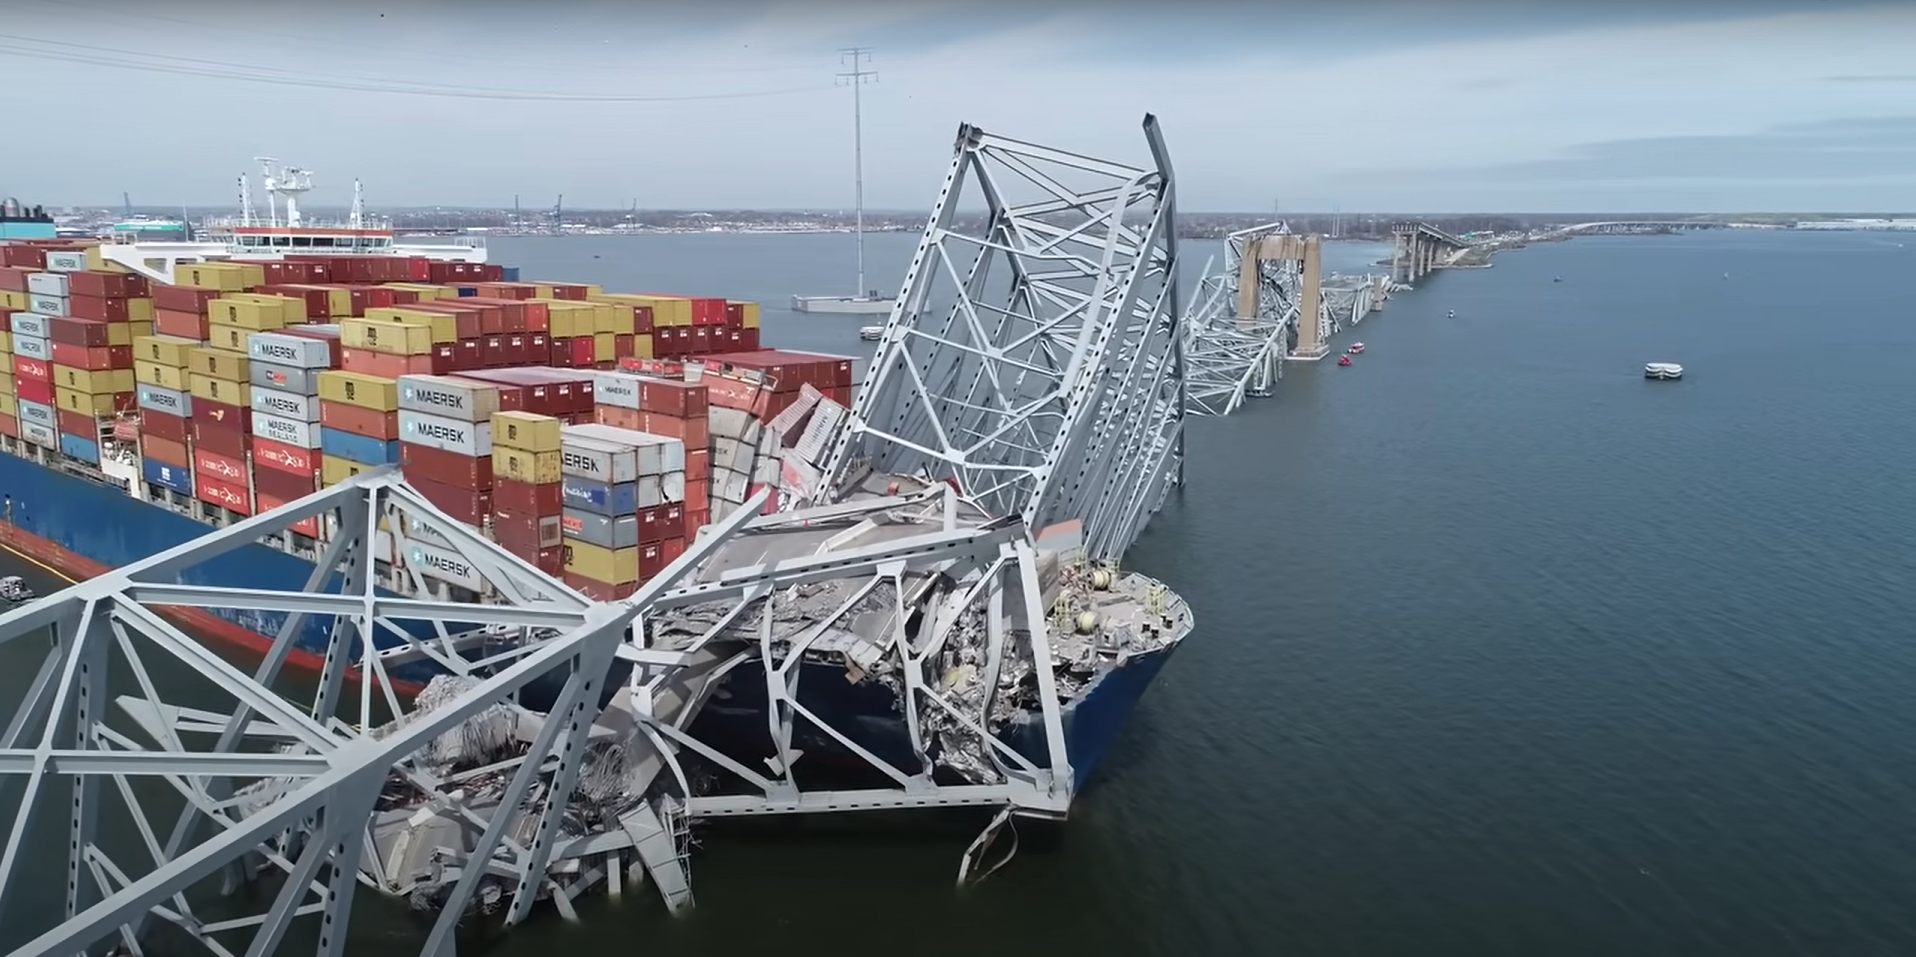 The cargo vessel Dali after striking the Francis Scott Key Bridge in Baltimore, Maryland